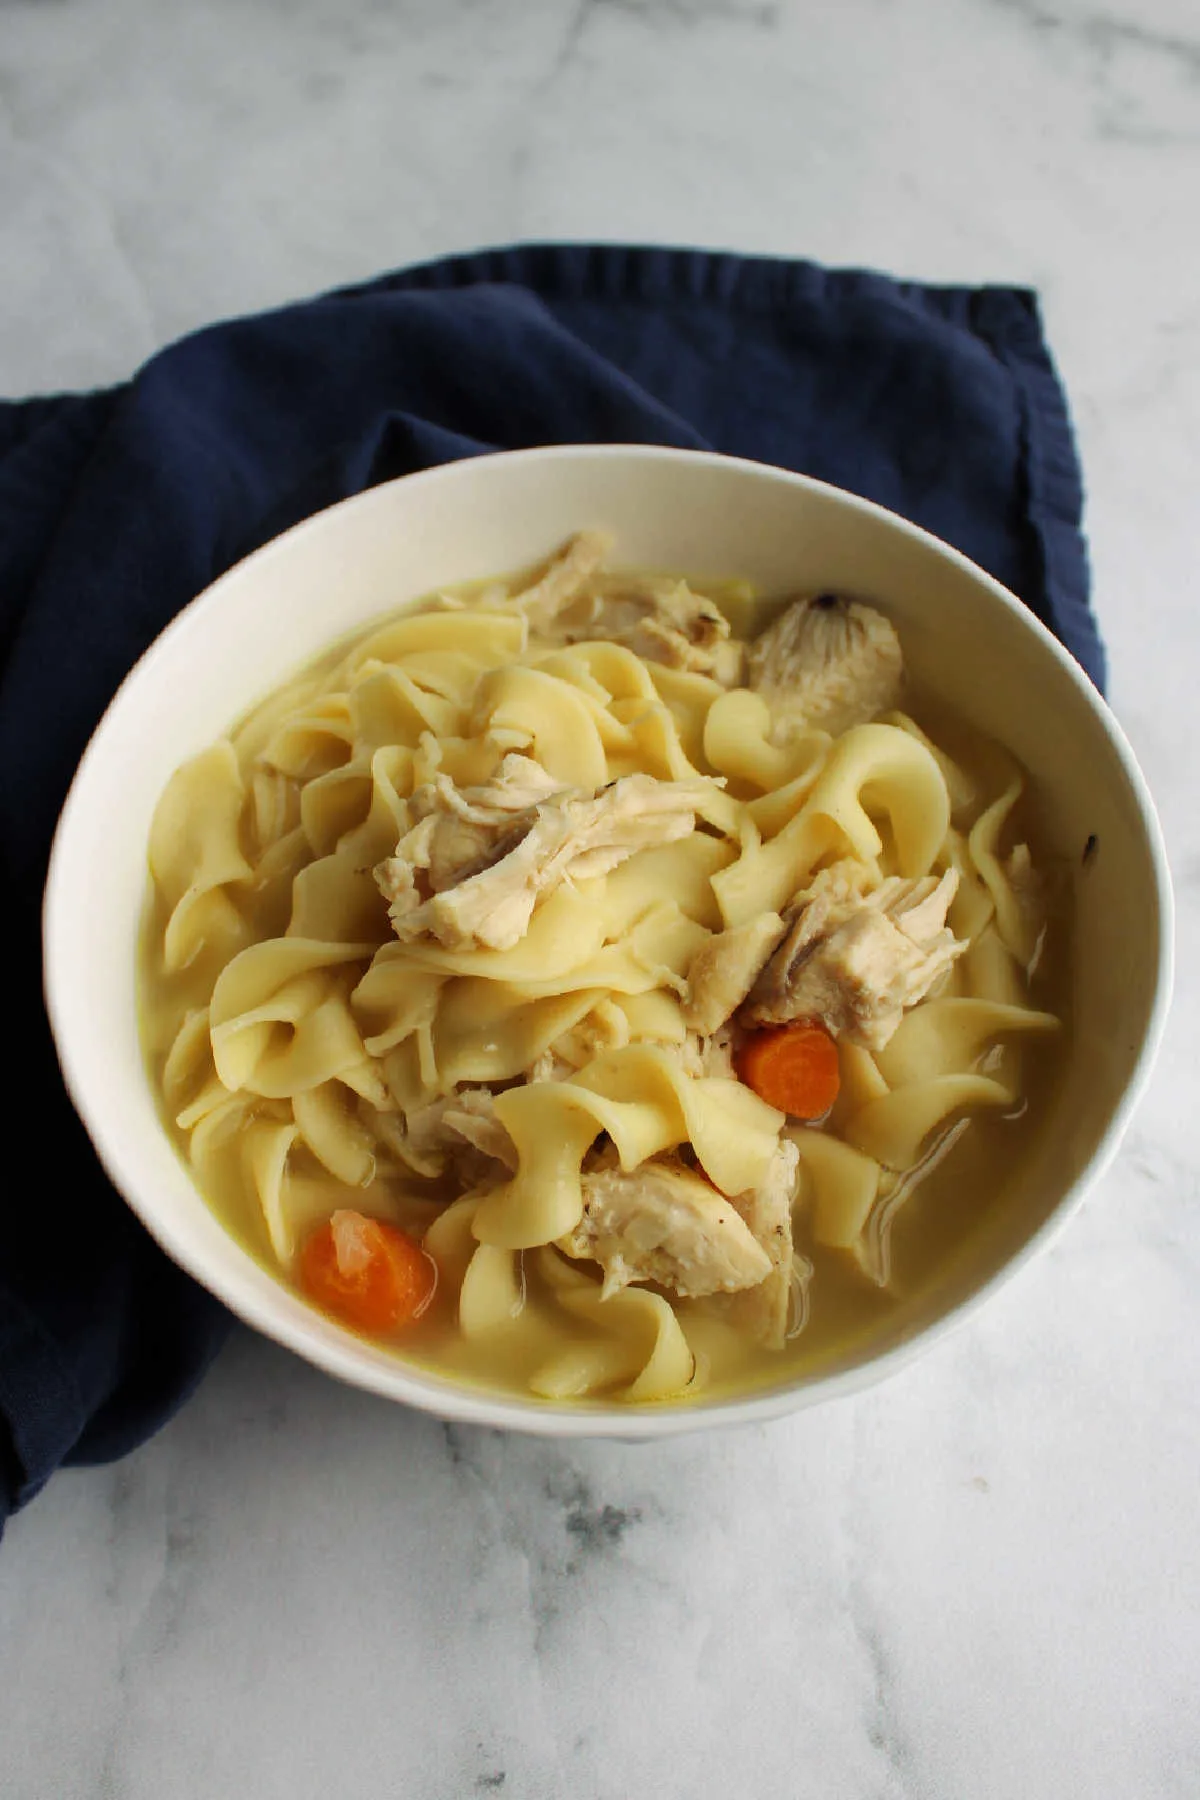 Bowl of homemade chicken noodle soup with wide egg noodles, chunks of carrot and chicken.